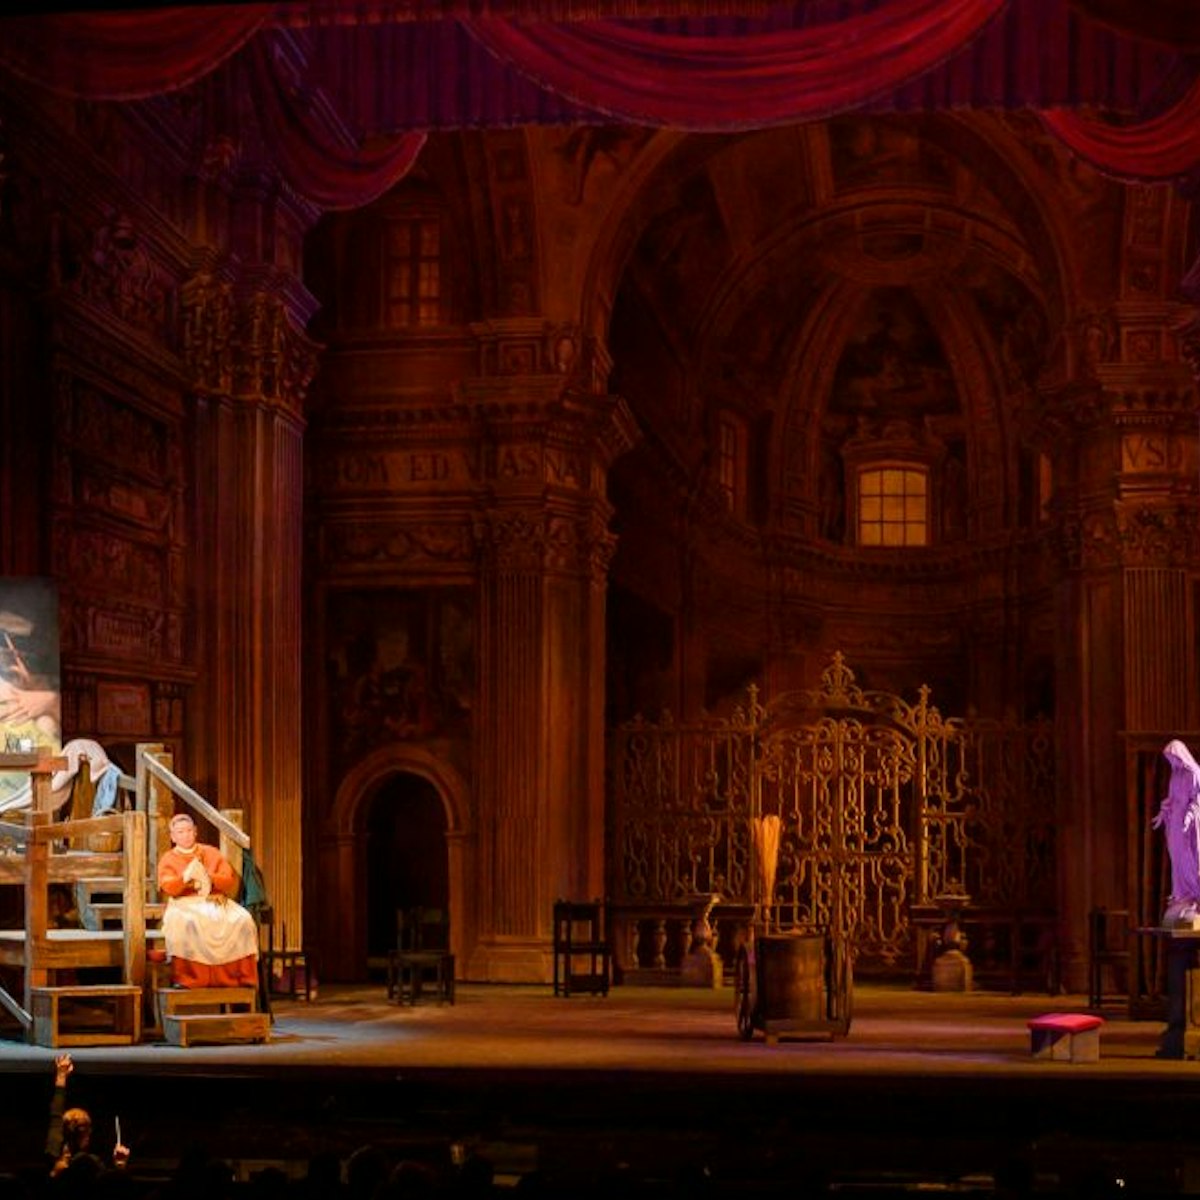 Wei Wu (R) and Riccardo Massi perform onstage during a production of Tosca for the Washington National Opera (WNO) at the Kennedy Center on May 22, 2019 in Washington, DC. - It took 150 hours of rehearsals over 27 days to finalize the production of Tosca at the Washington National Opera. Each show involves 217 staff, including 96 stage performers, 66 musicians in the pit and another seven backstage. Staff spent eight weeks on fittings, alterations and new dresses for the period costumes, including Tosca's hand-printed mauve chiffon gown in Act I. (Photo by Andrew CABALLERO-REYNOLDS / AFP)        (Photo credit should read ANDREW CABALLERO-REYNOLDS/AFP via Getty Images)
1145825810
Horizontal